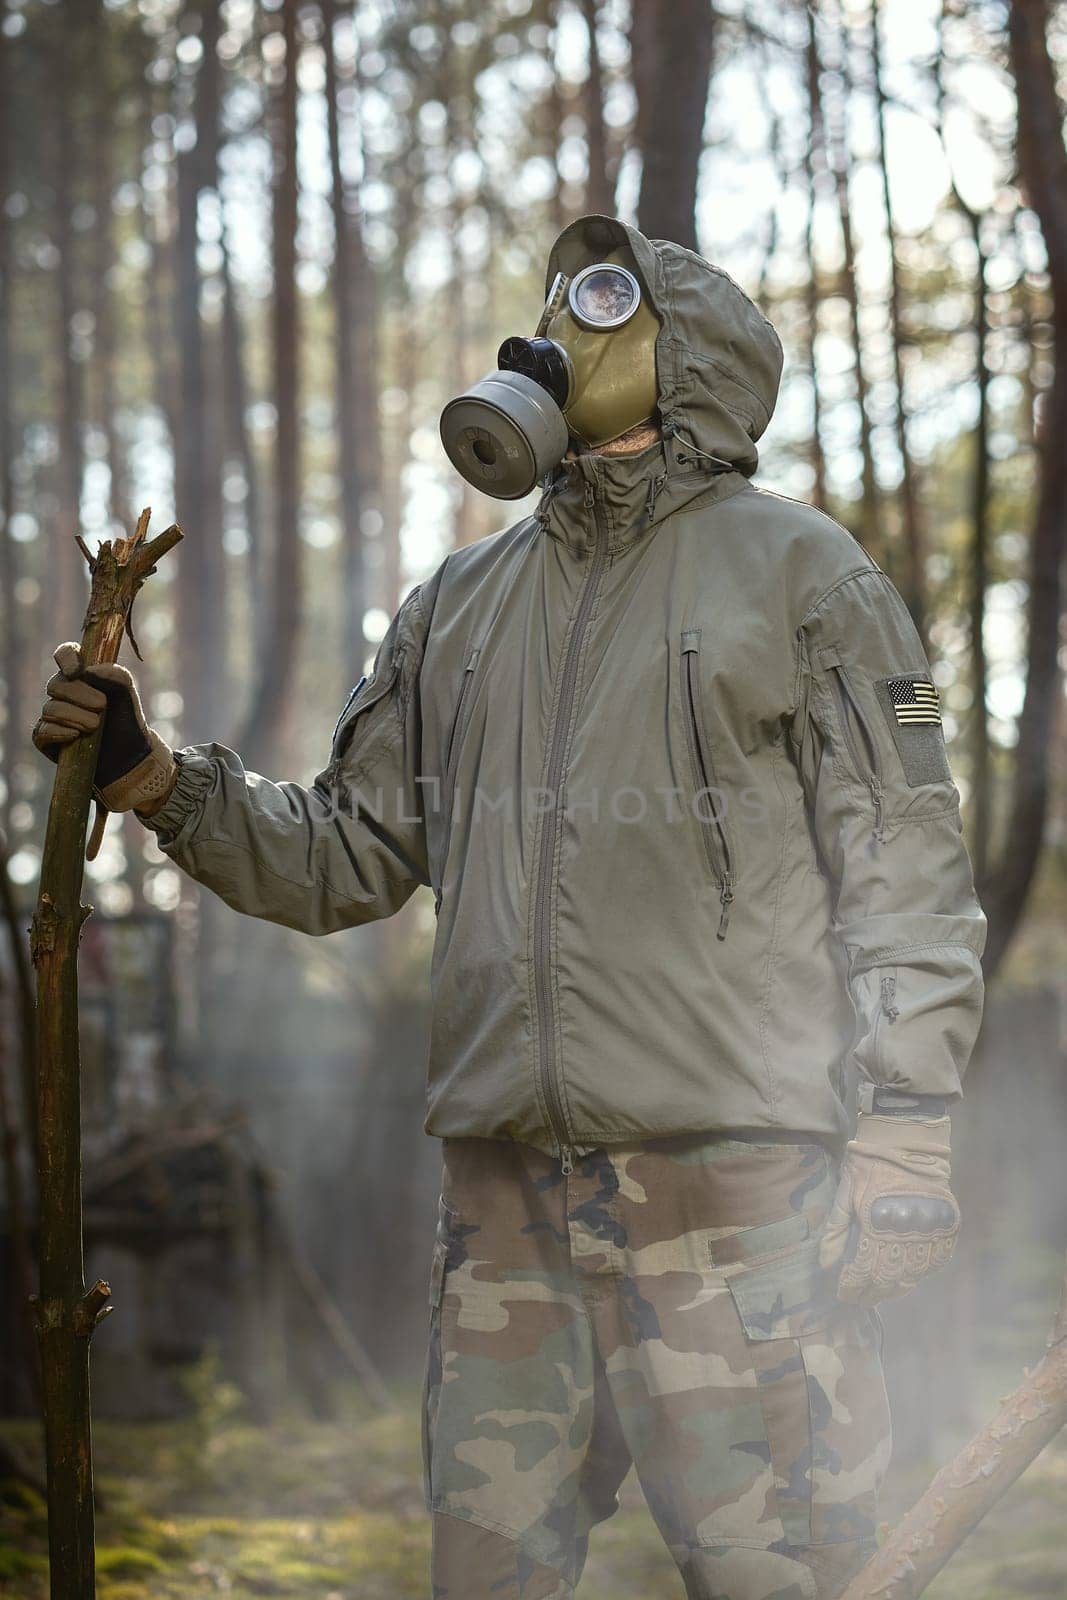 man in a gas mask protects himself from coronavirus in the woods